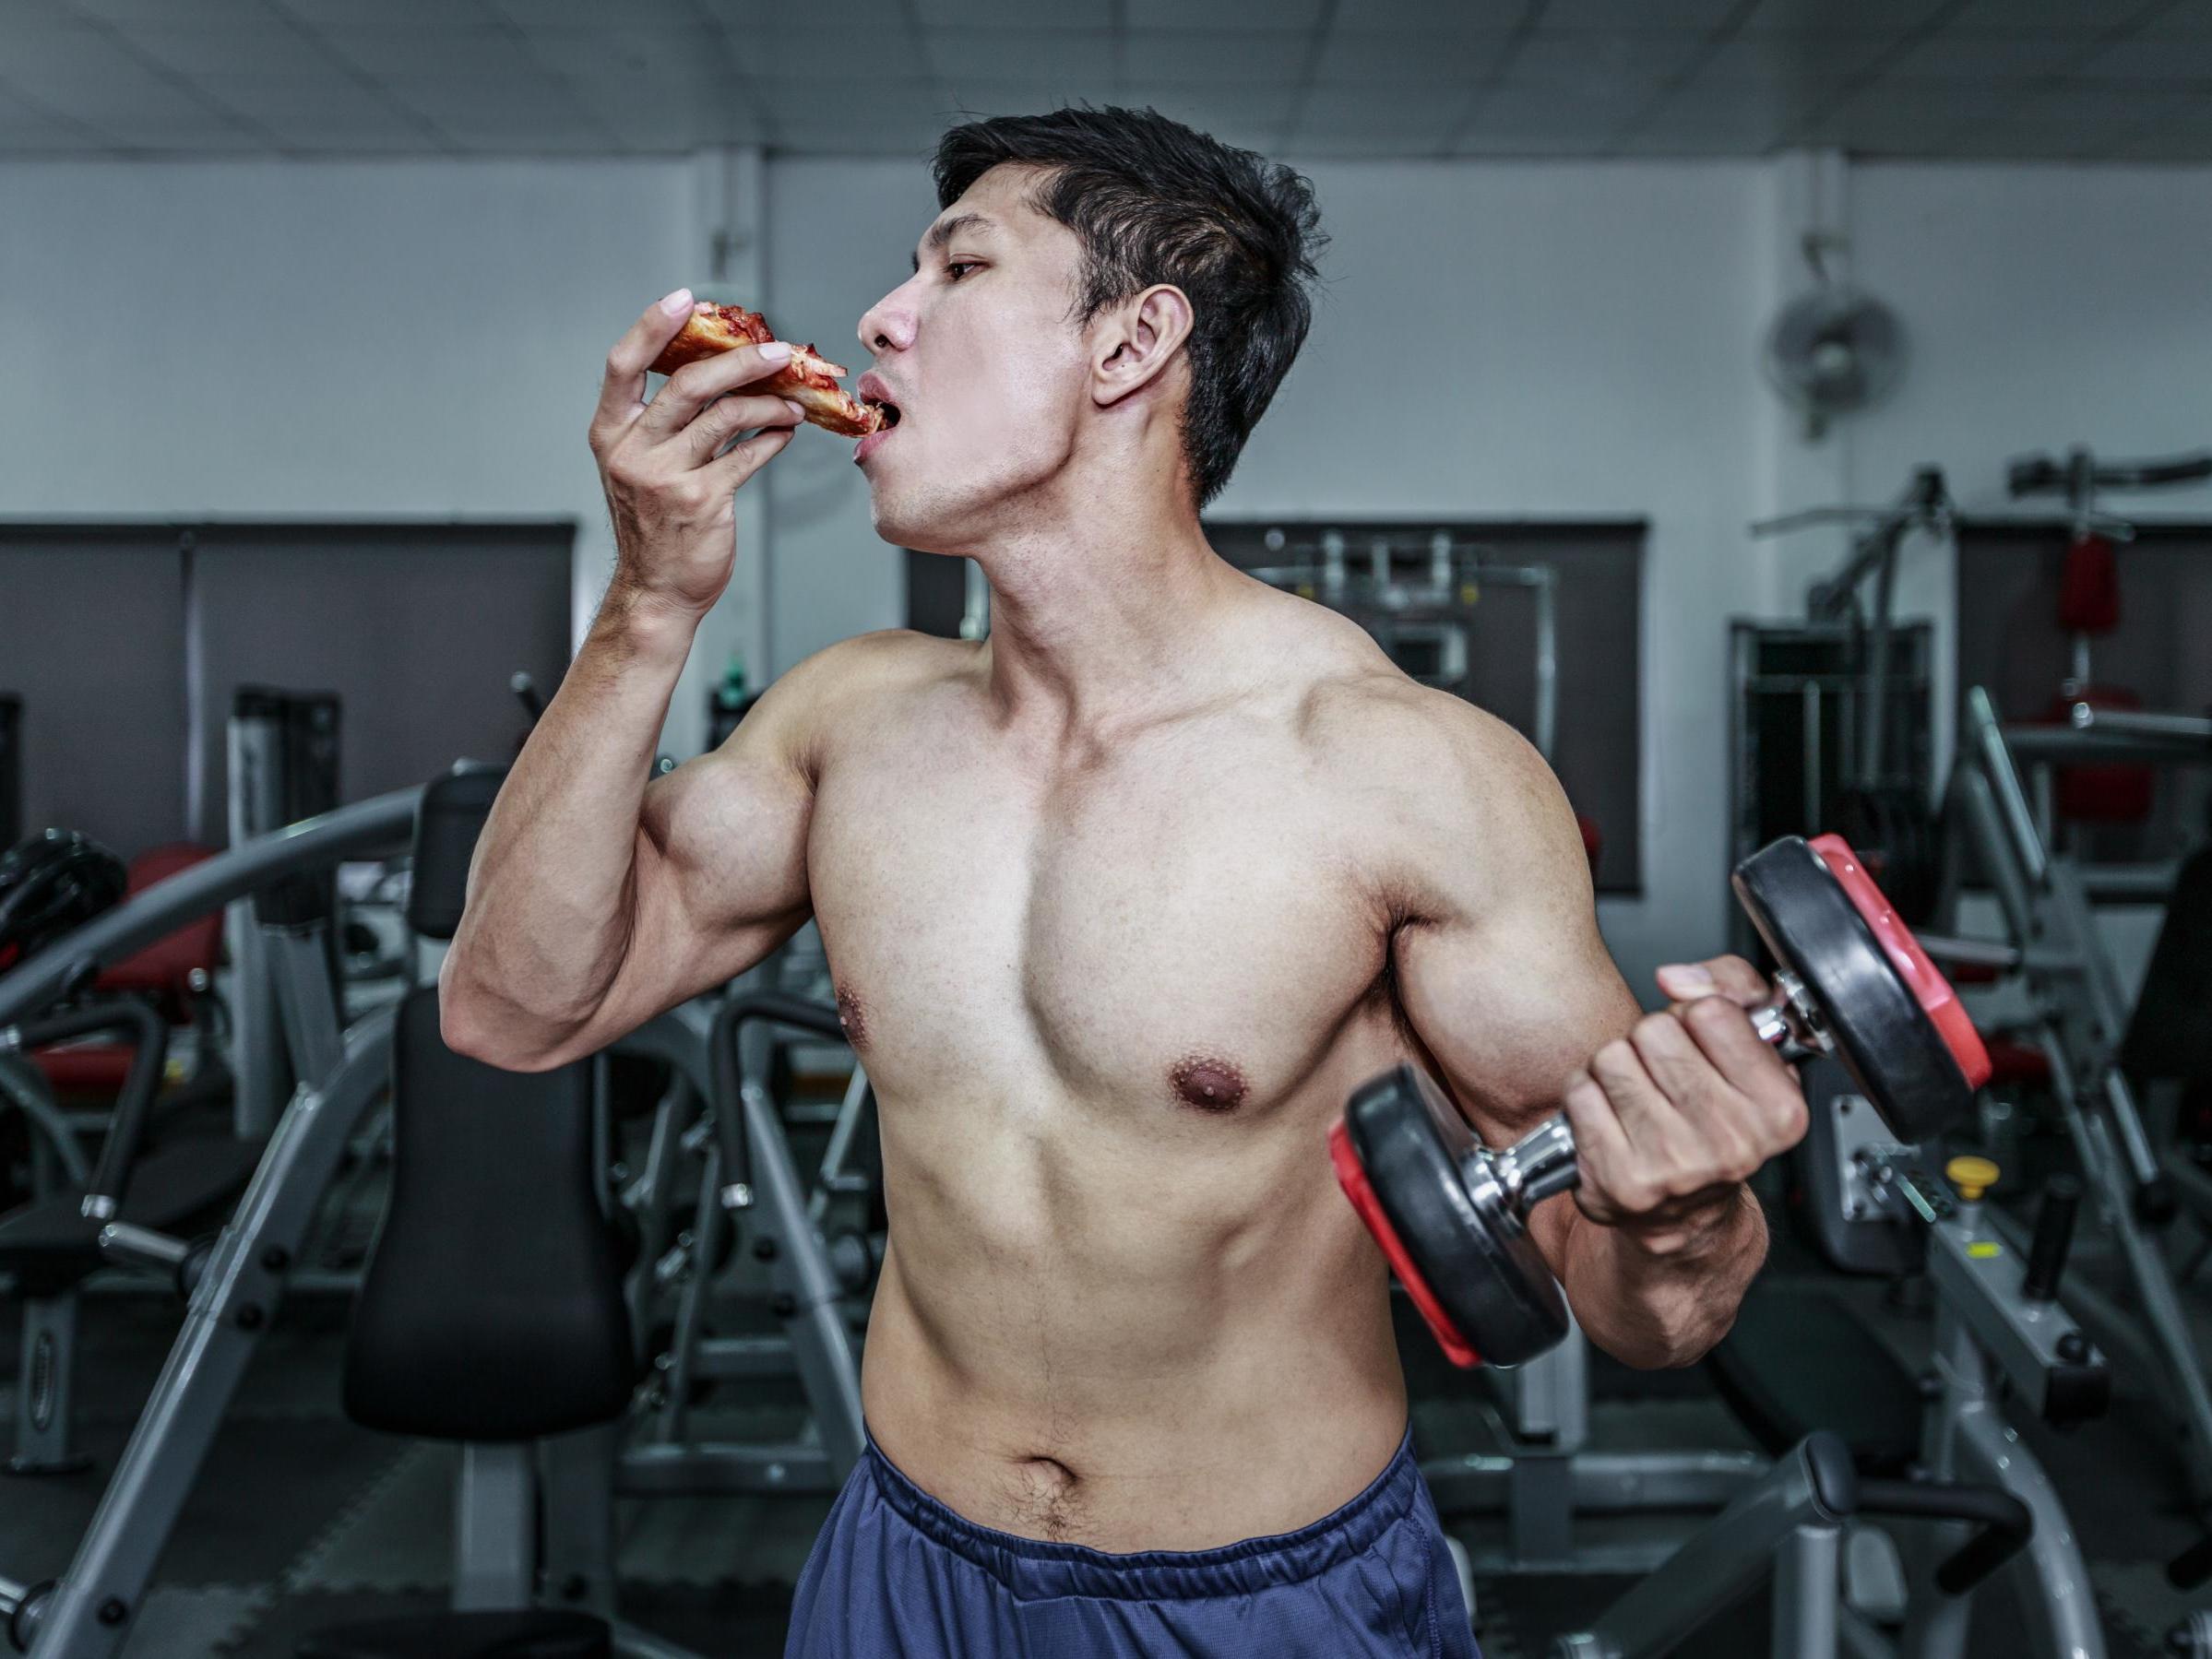 Young, fit men who eat a diet of pizza, chips and burgers have much lower sperm count, study finds The Independent The Independent pic image